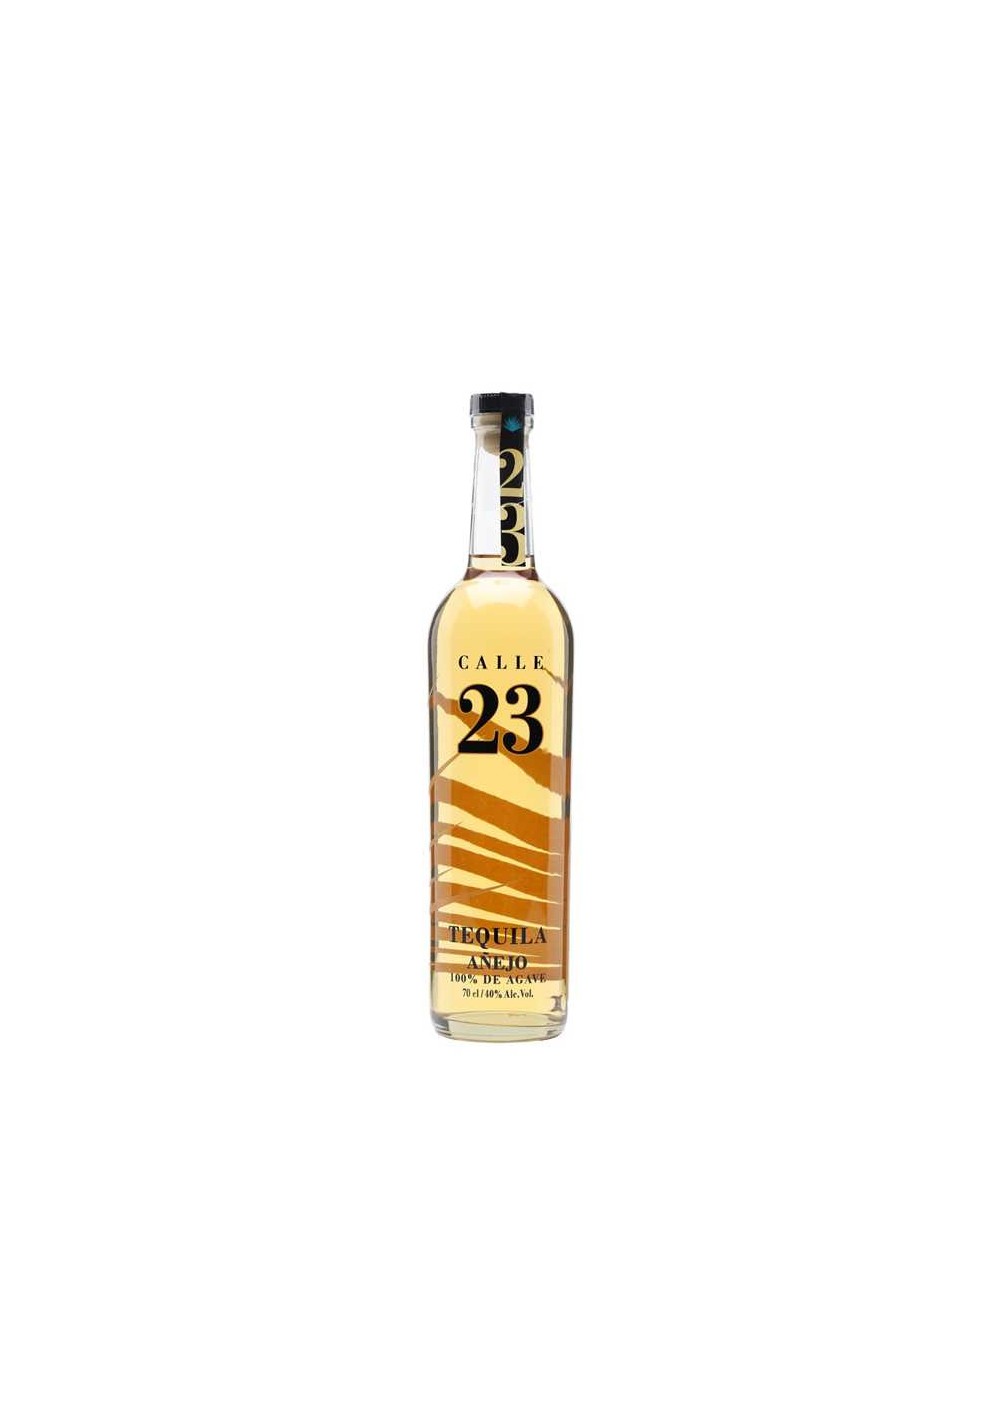 Calle 23 - Tequila Anejo - (50cl)